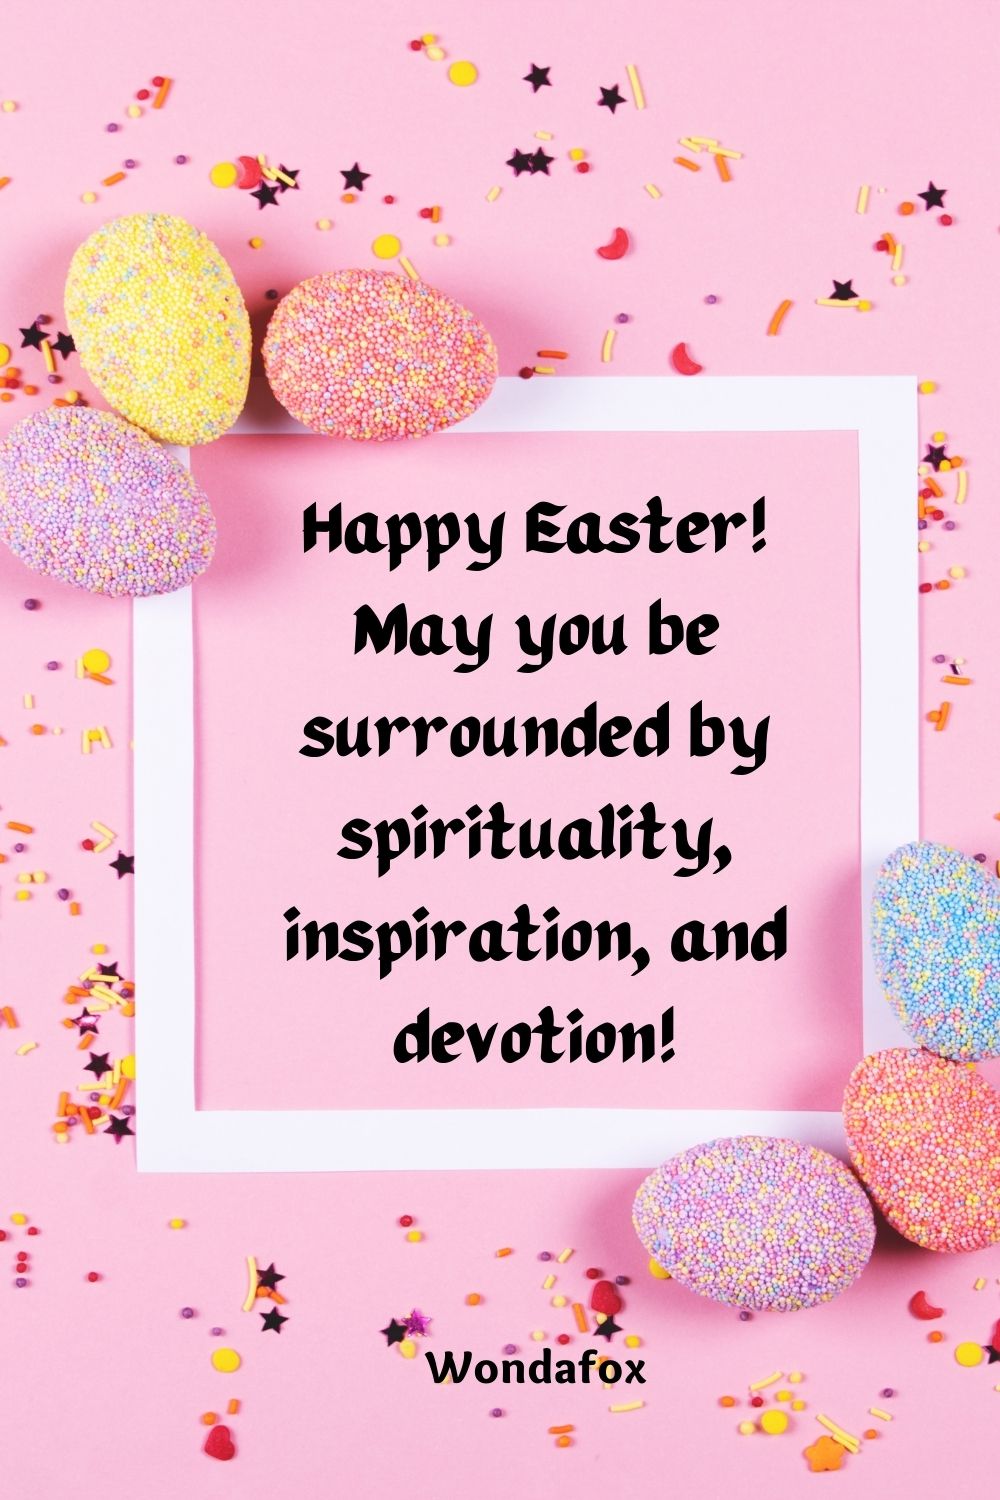 Happy Easter! May you be surrounded by spirituality, inspiration, and devotion!